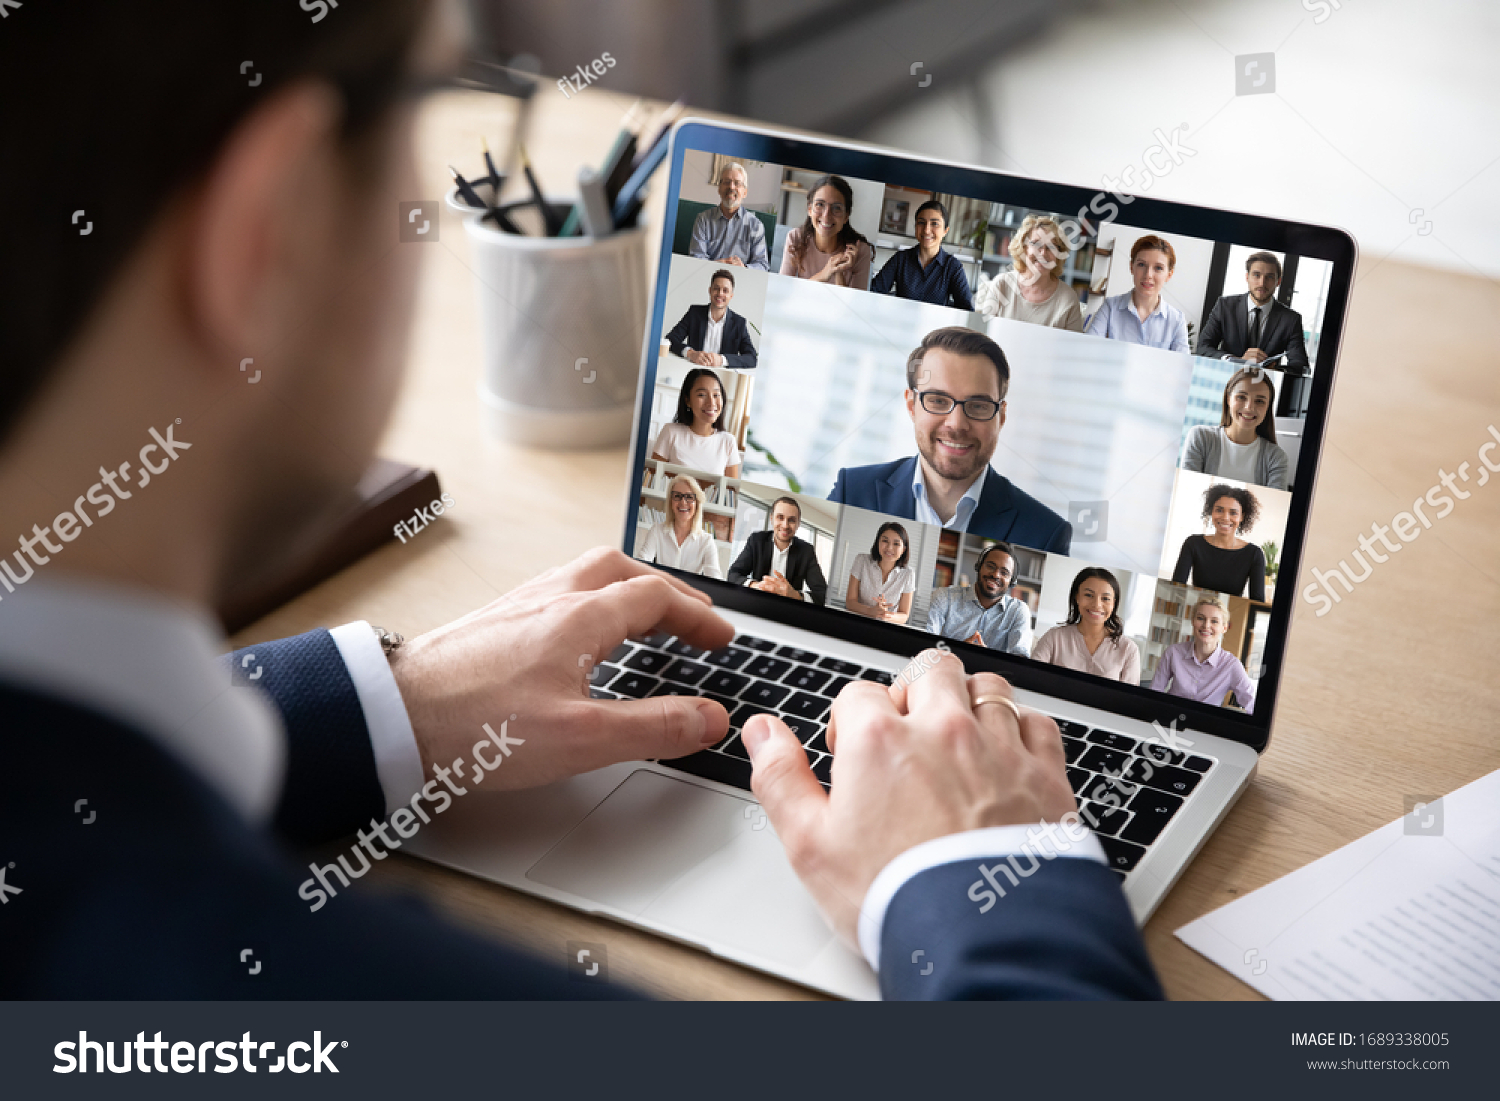 Rear view of businessman speak on web conference with diverse colleagues using laptop Webcam, male employee talk on video call with multiracial coworkers have online meeting briefing from home #1689338005